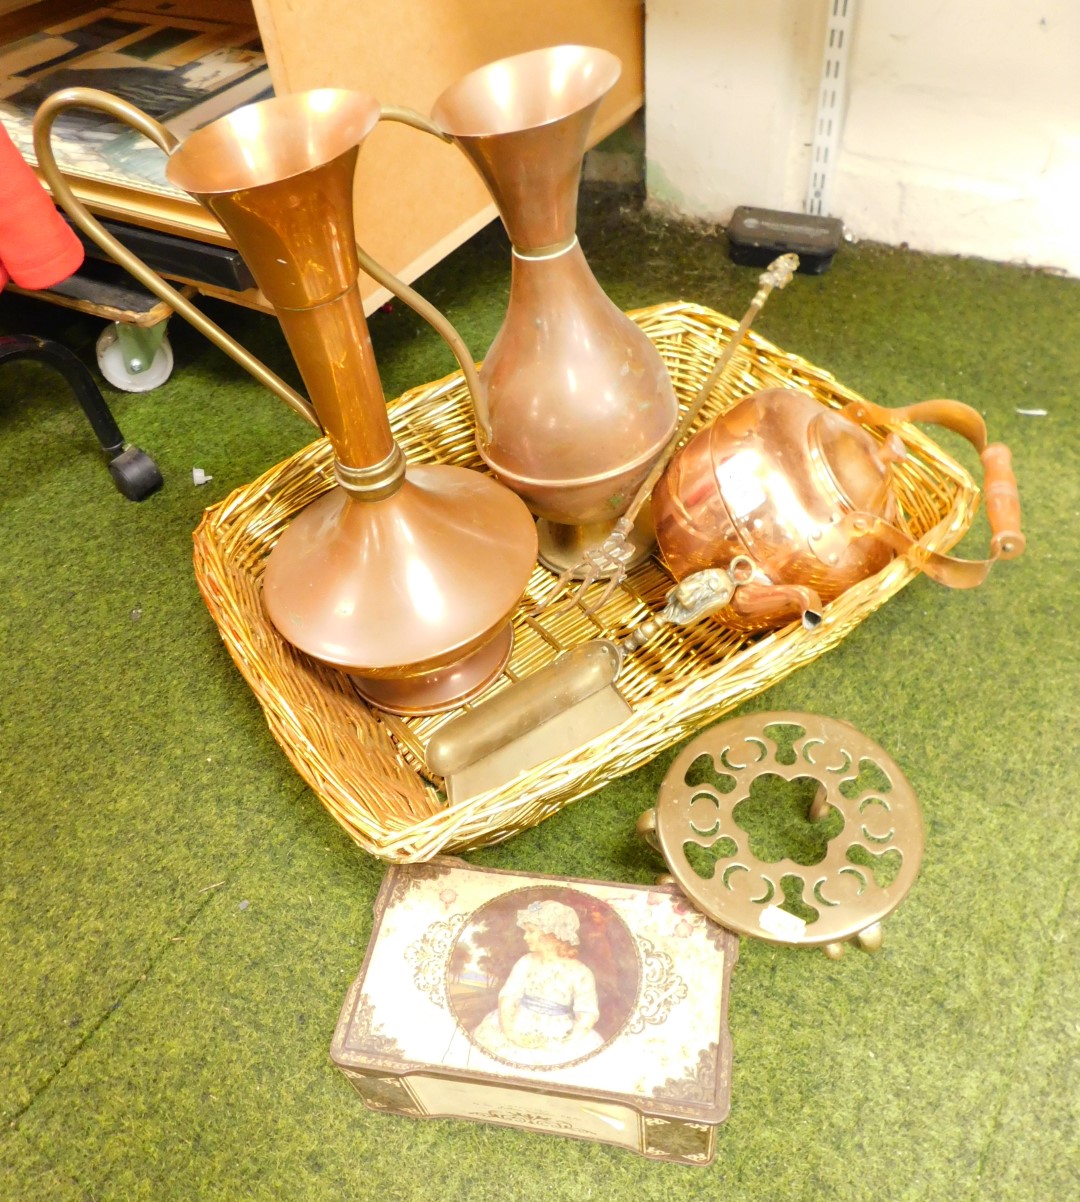 A quantity of decorative brass and copper wares, to include two large water jugs or ewers, the large